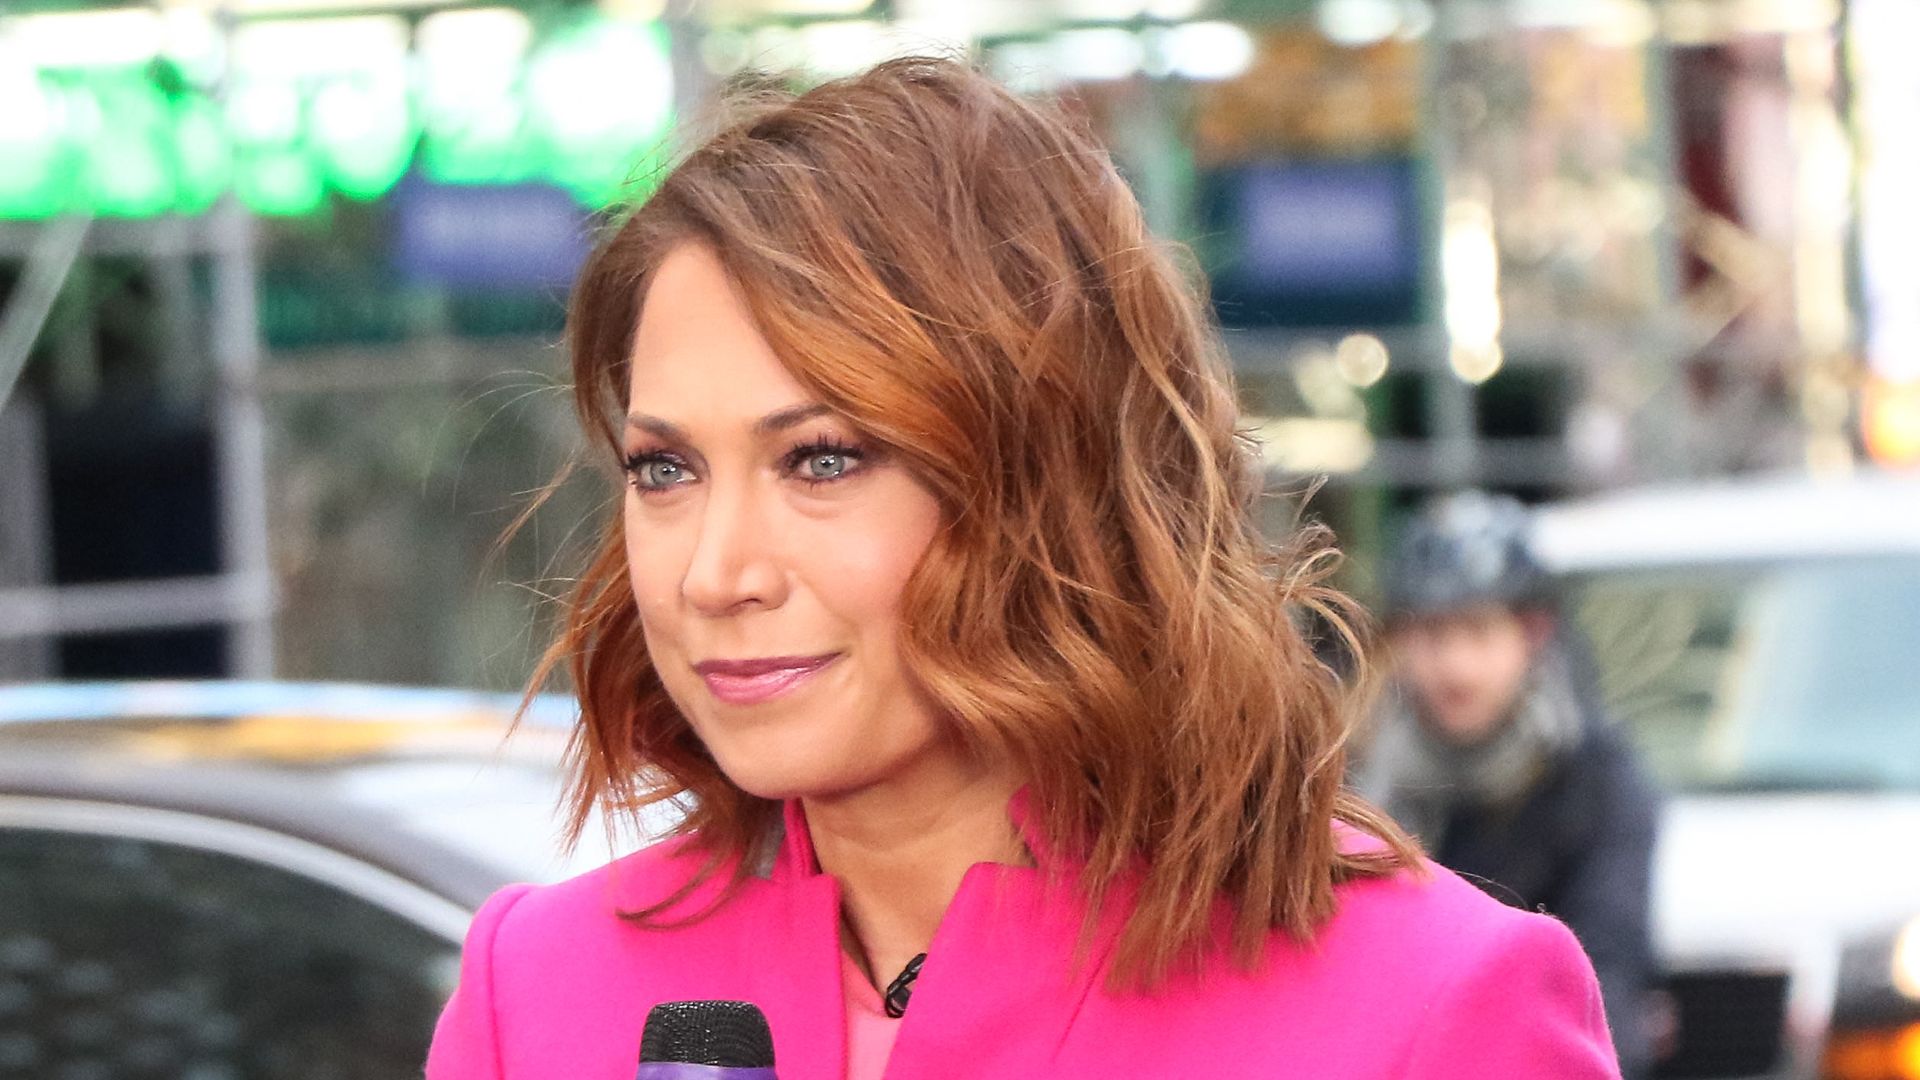 Ginger Zee is seen at 'Good Morning America' on February 14, 2020